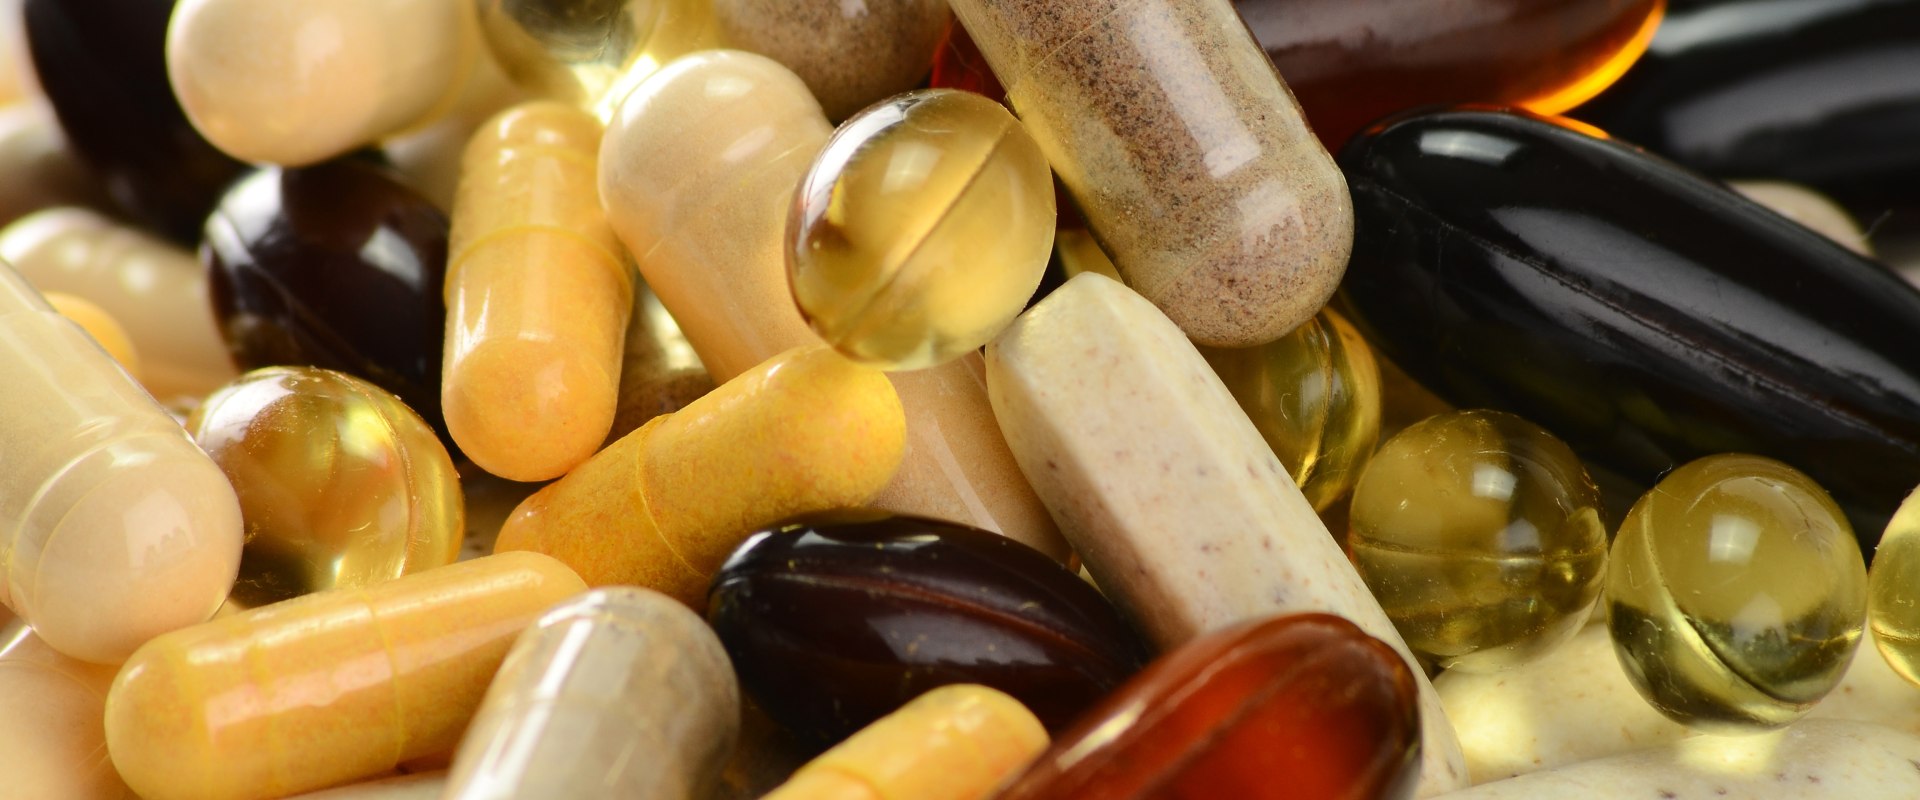 Are Daily Supplements Safe to Take? - A Comprehensive Guide